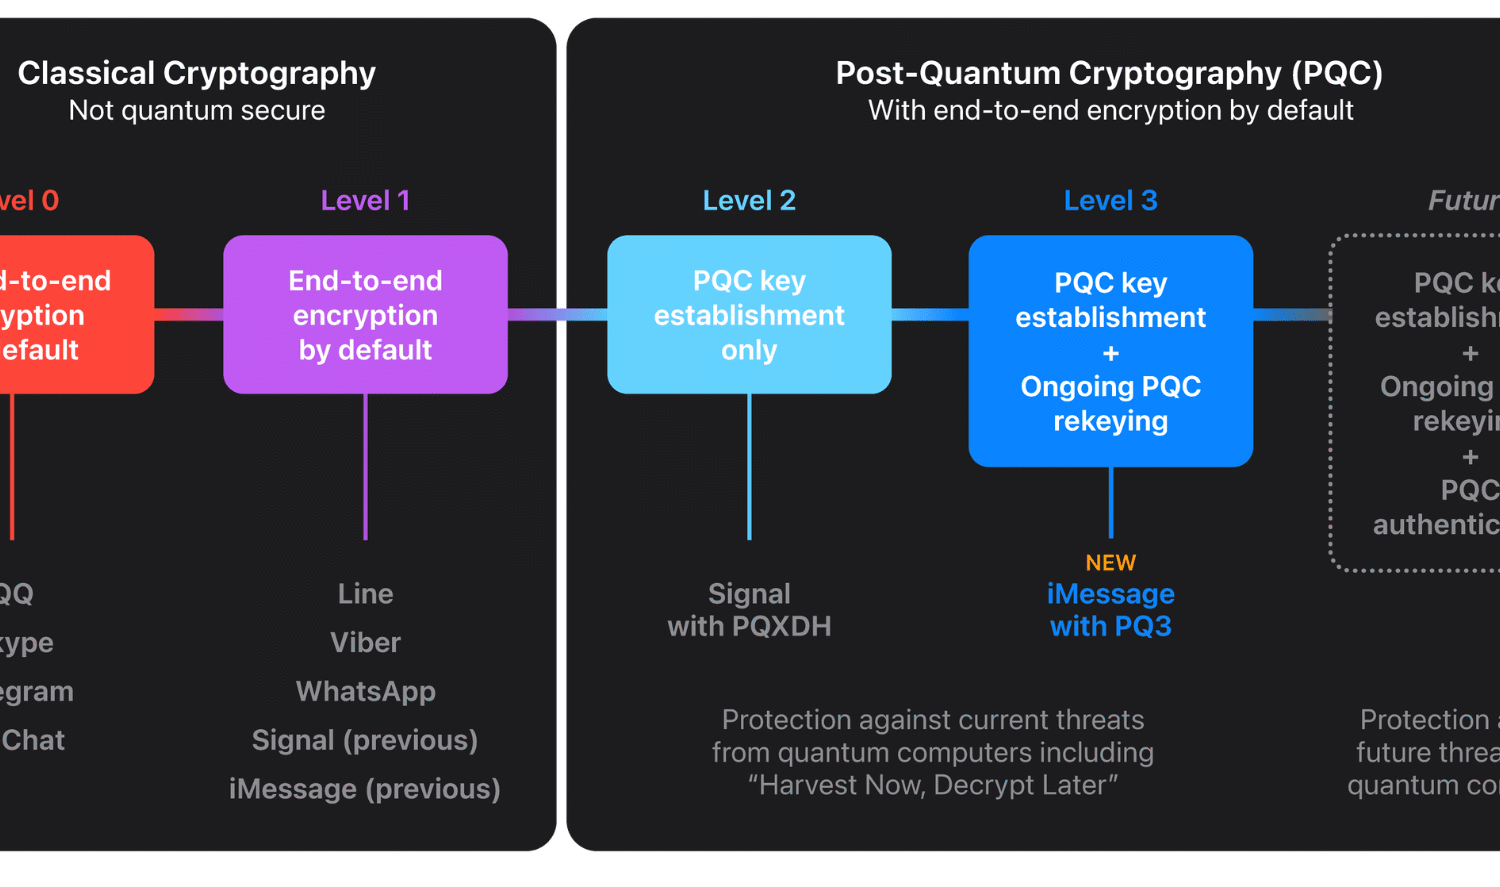 Illustration comparing classical cryptography to post-quantum cryptography in messaging apps